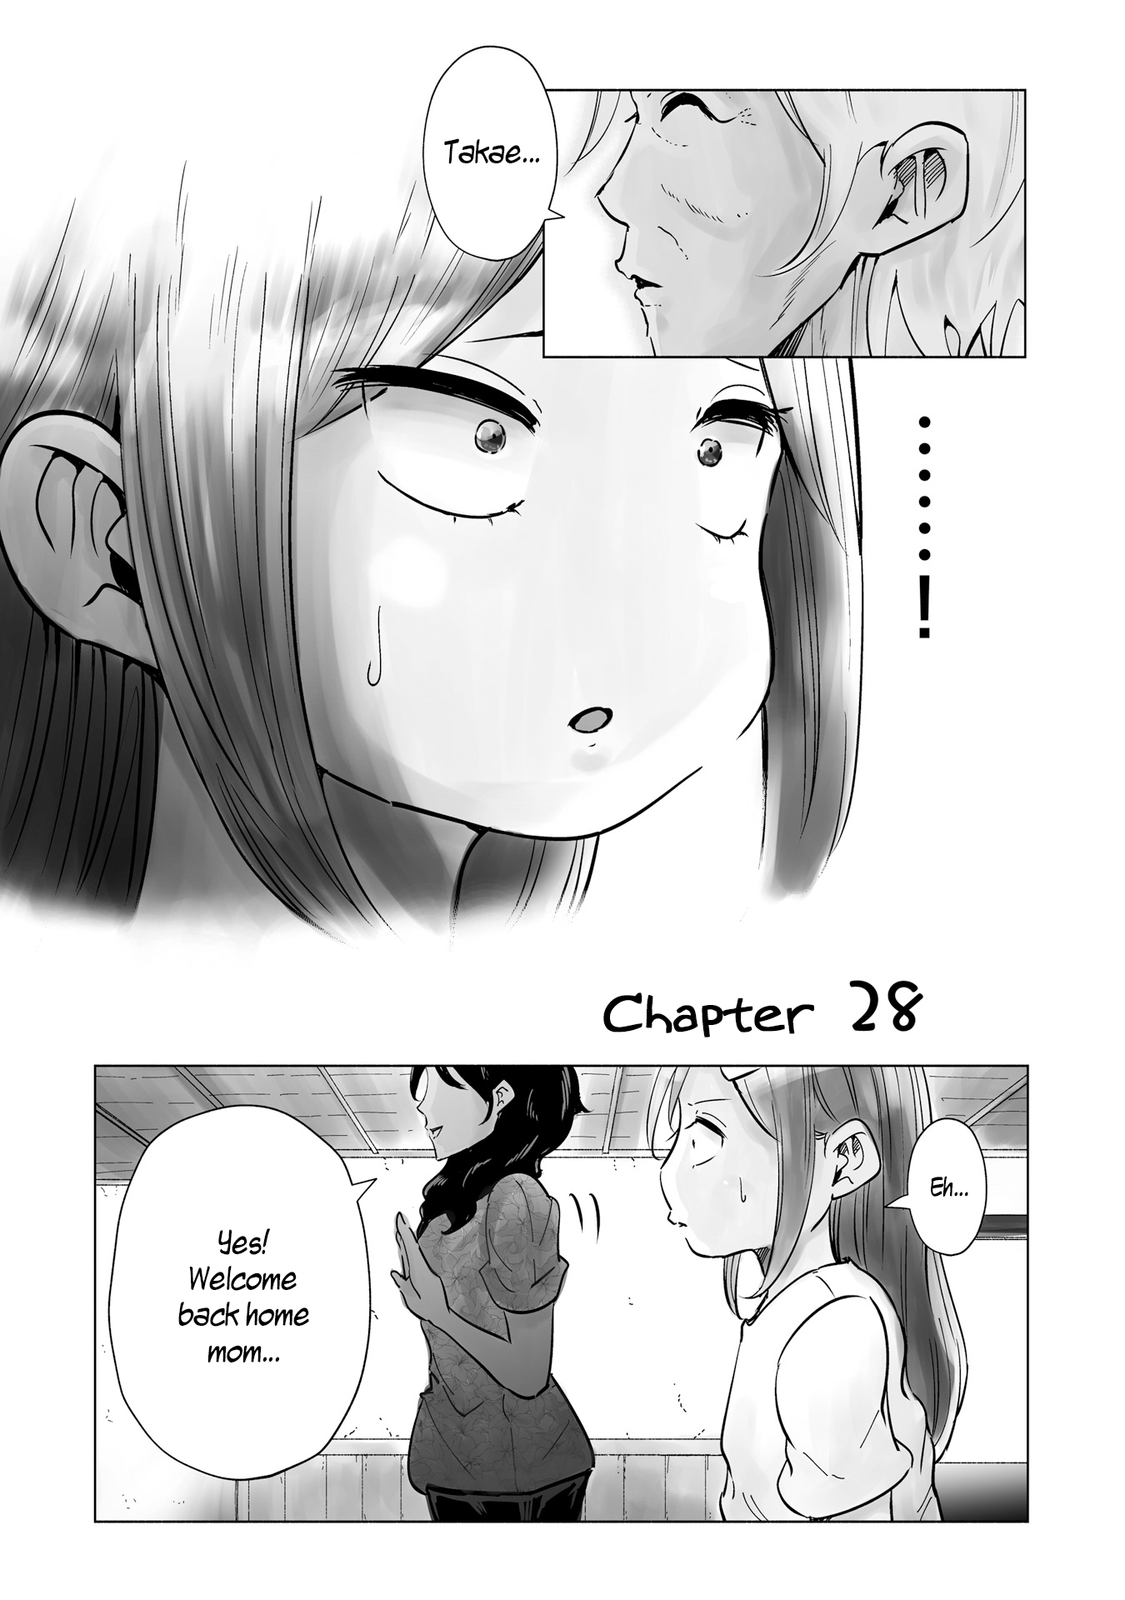 If My Wife Became An Elementary School Student - Page 1